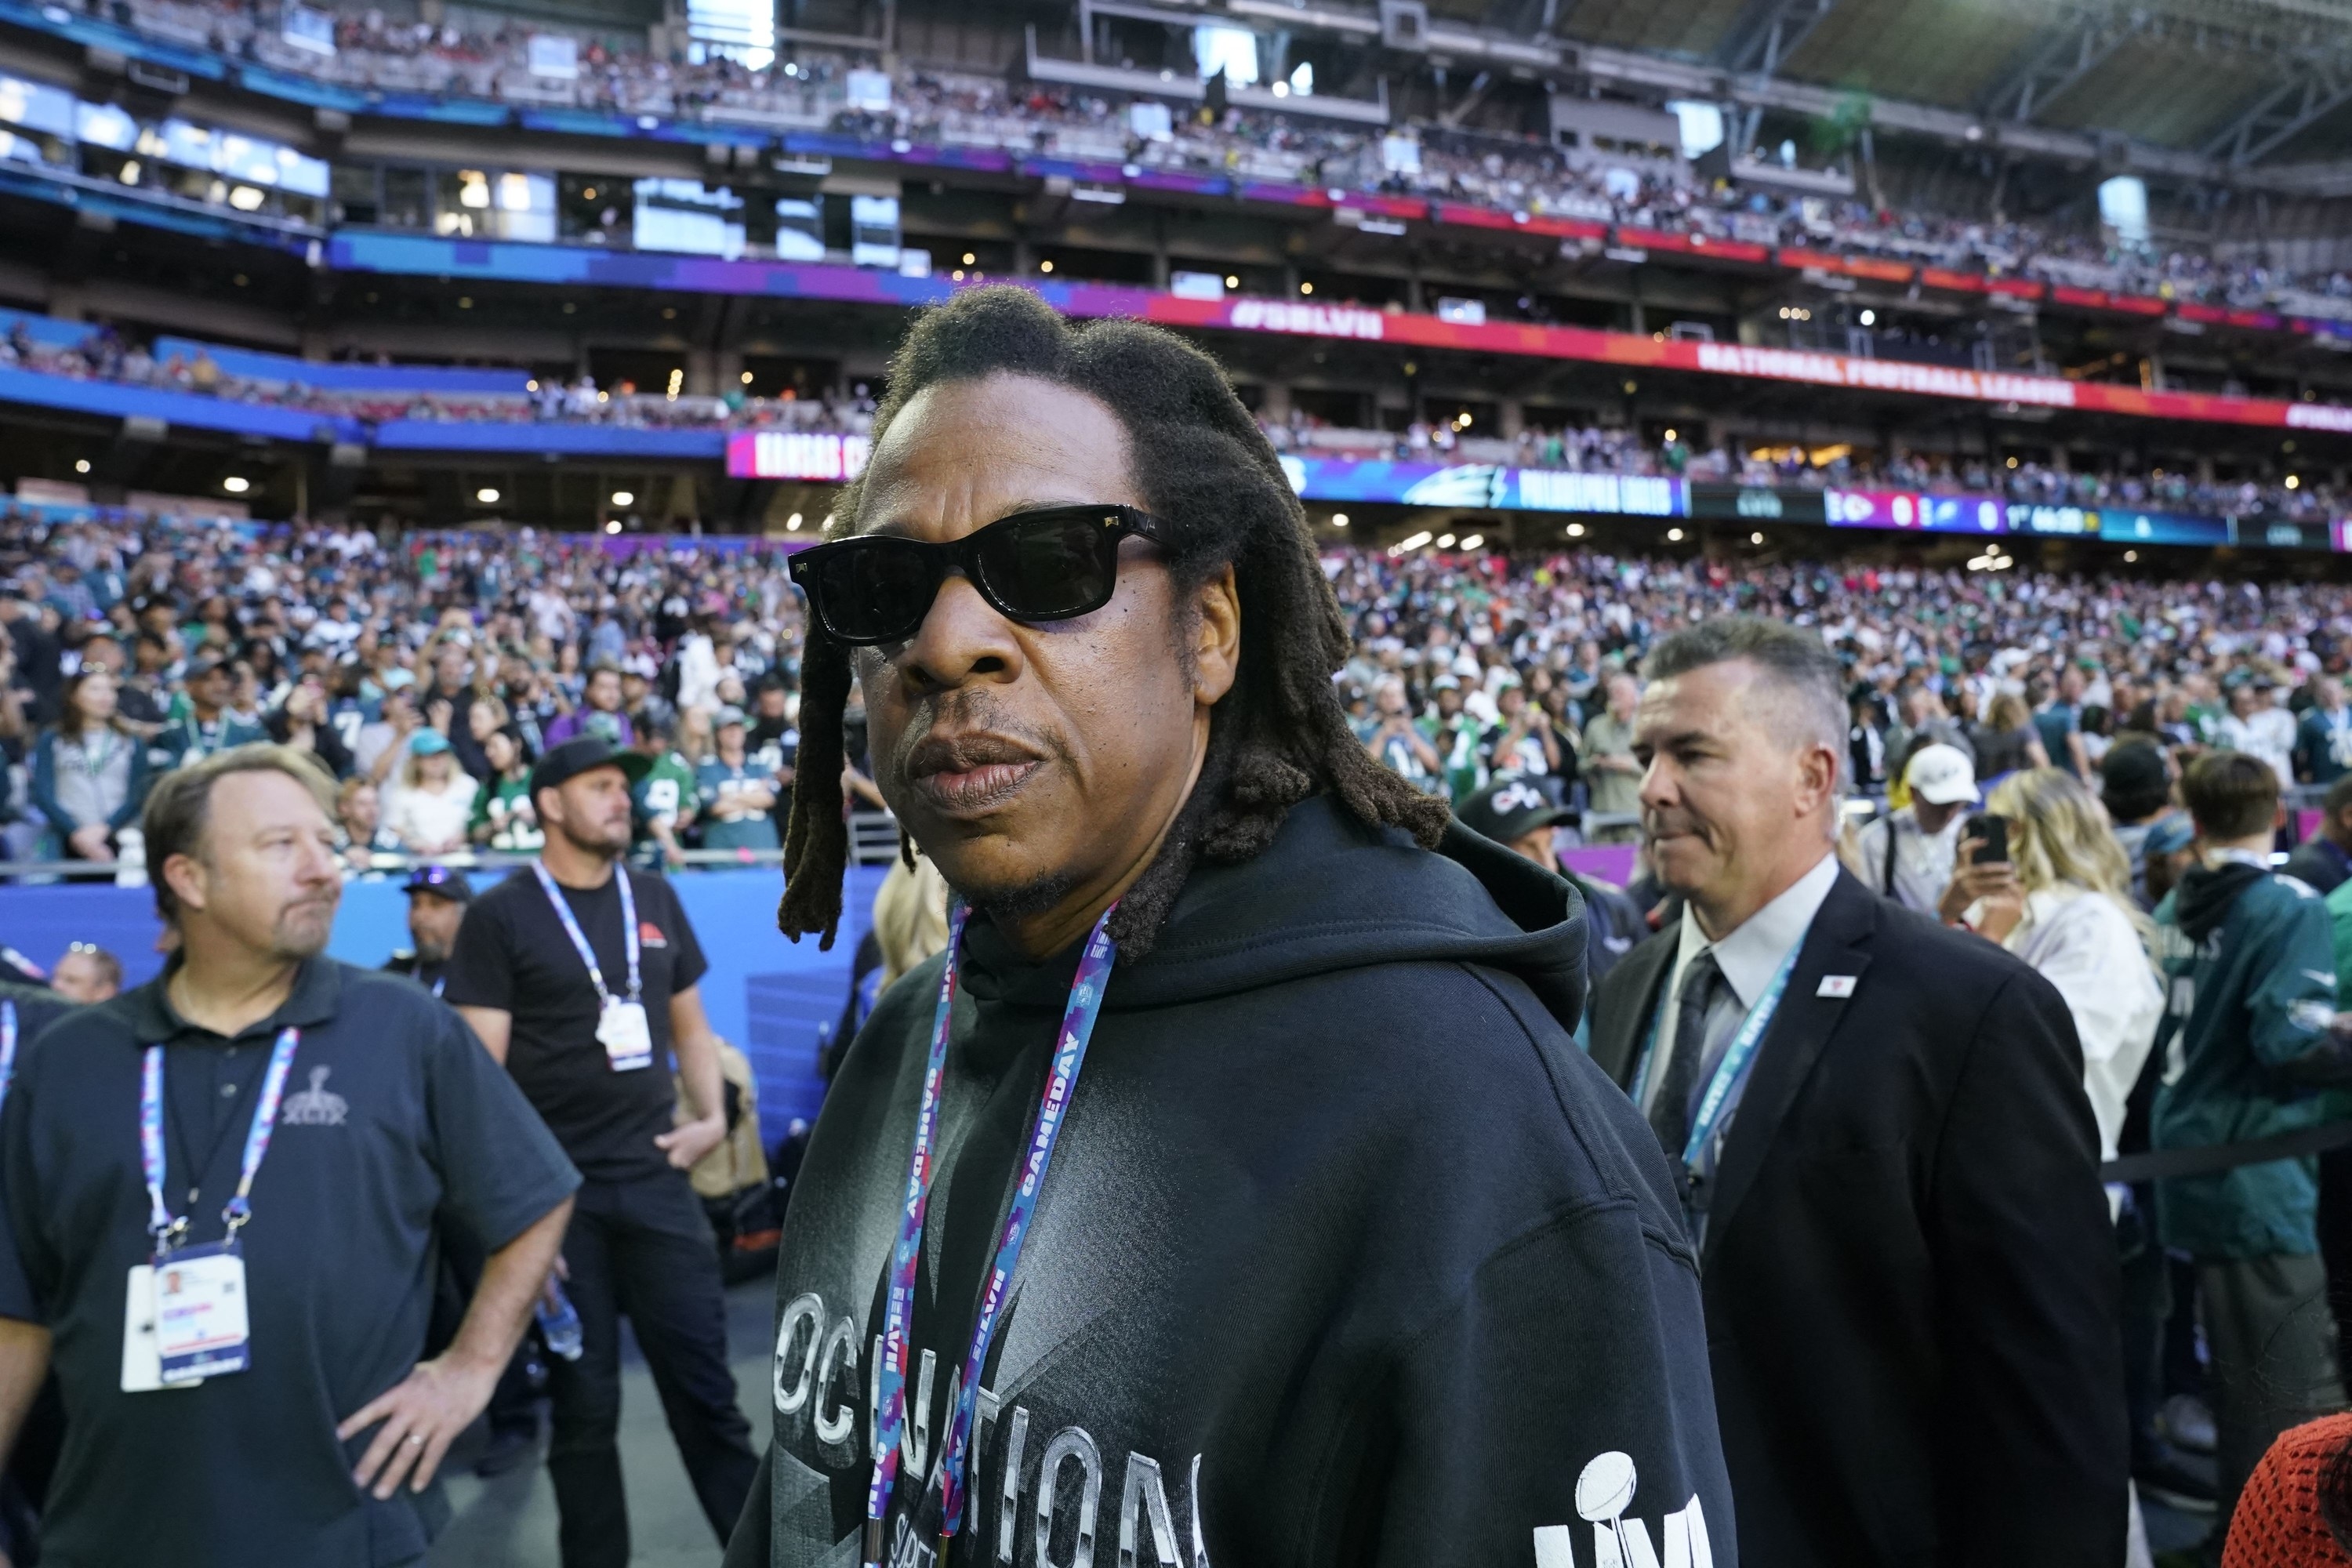 A close-up of Jay wearing sunglasses as he walks on the sideline at the Super Bowl